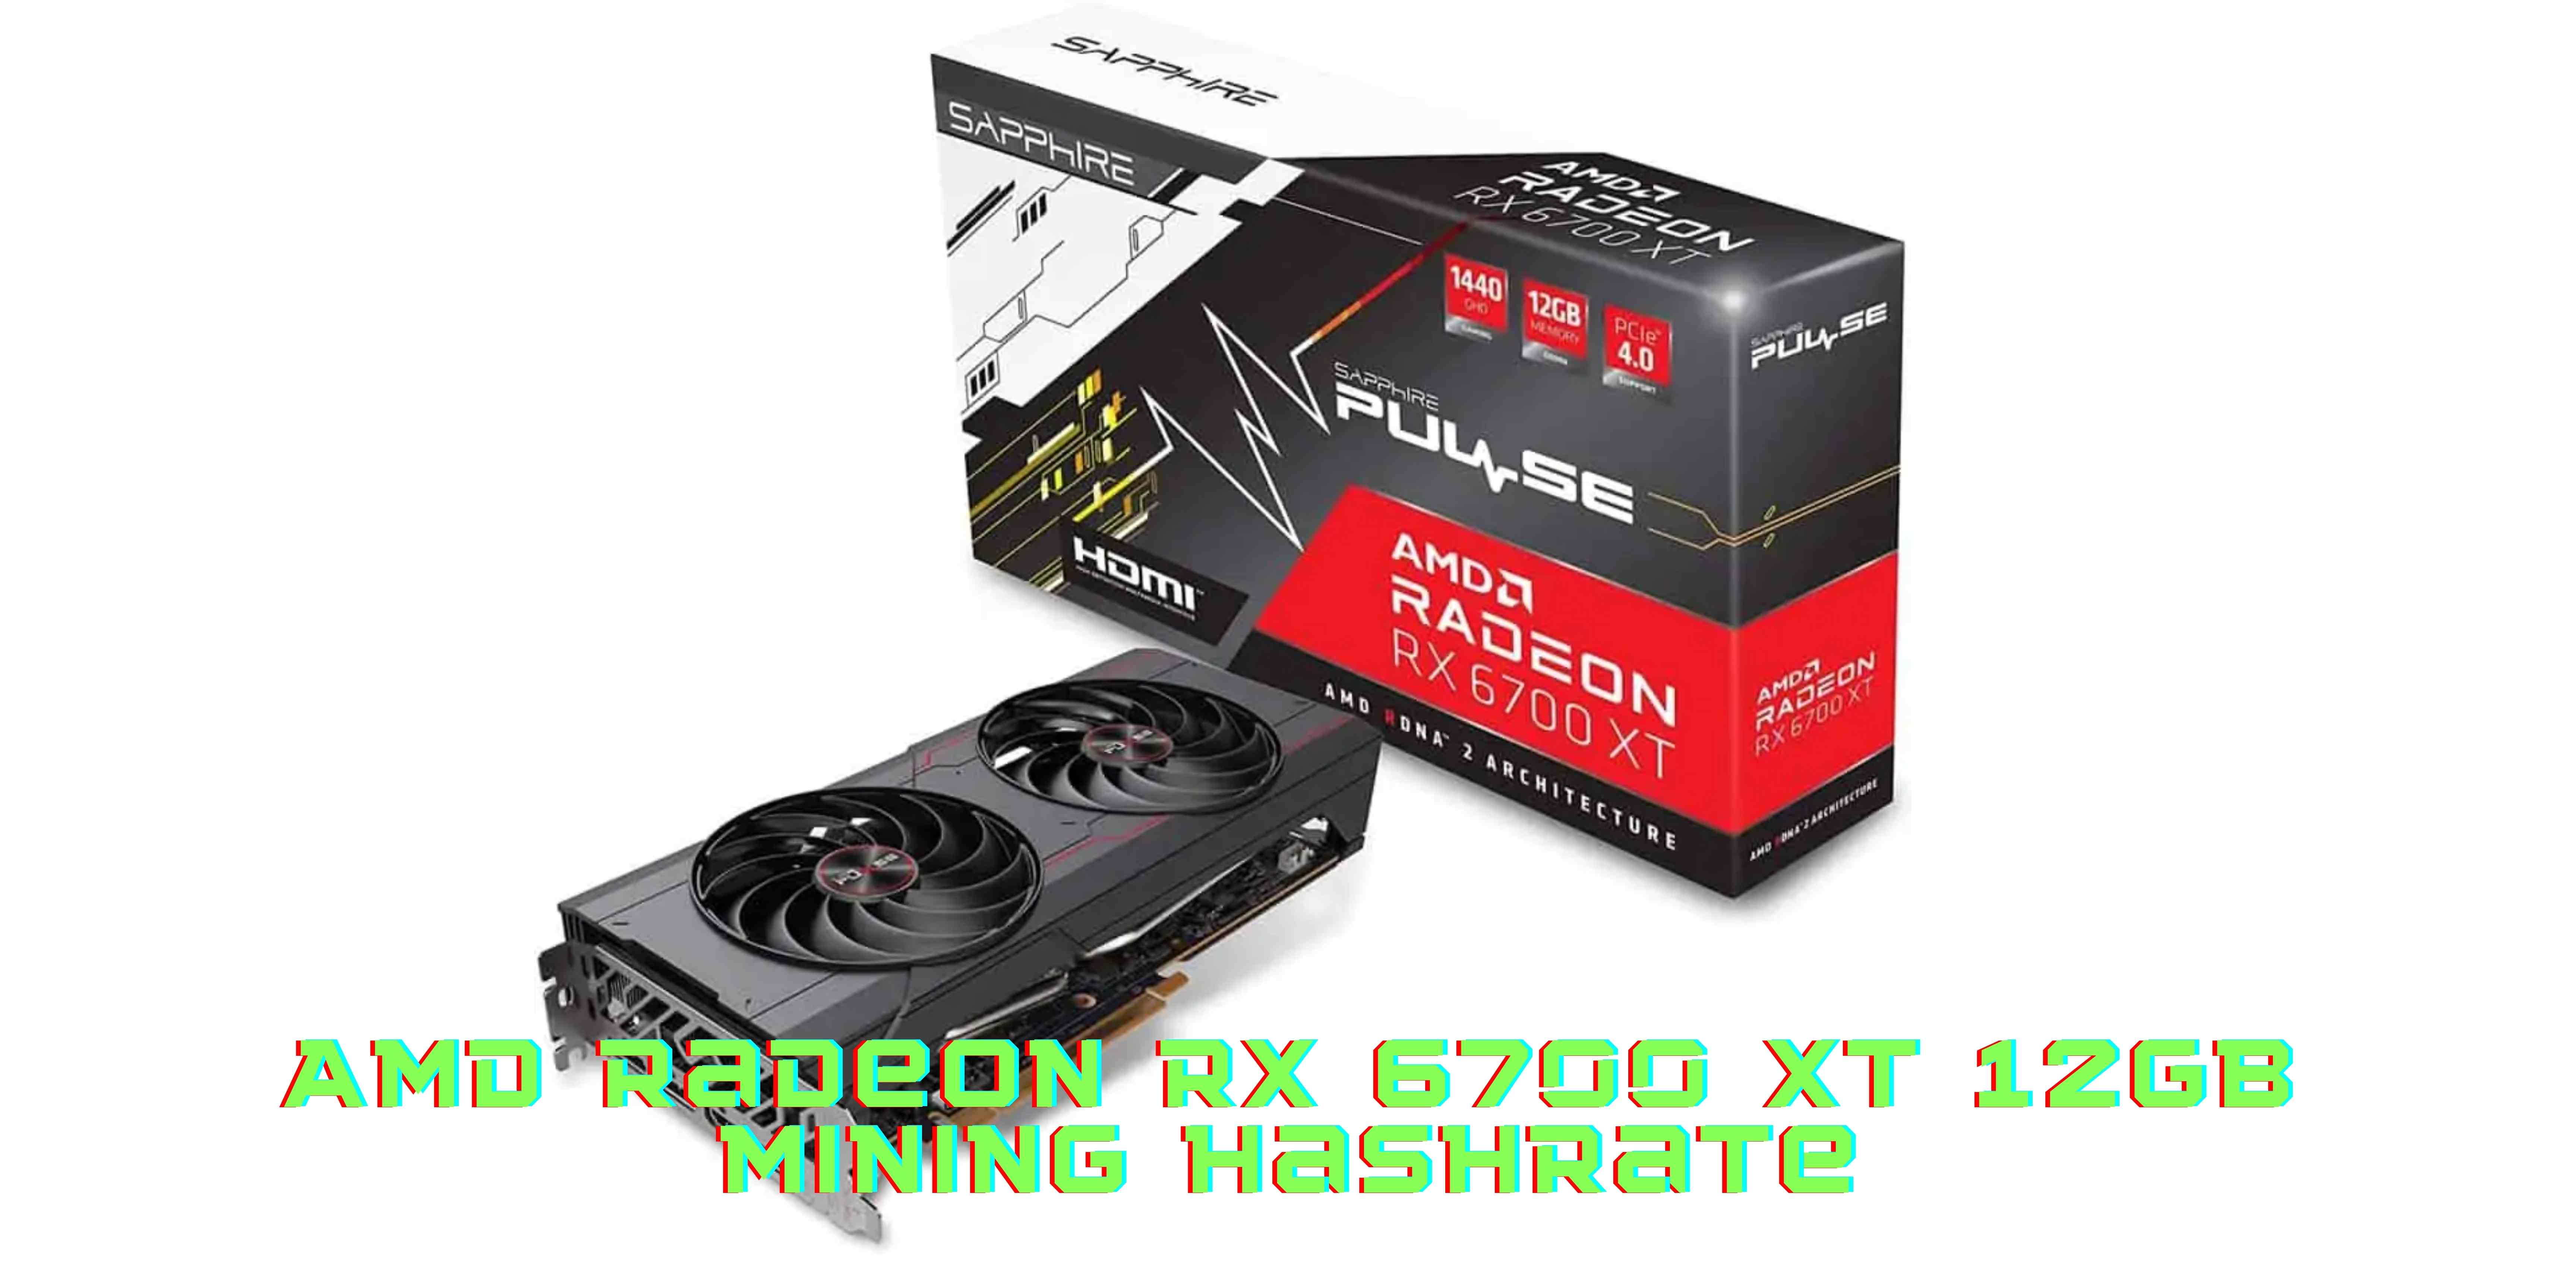 Want To Mine Using The AMD Radeon RX 6700 XT 12GB Mining Hashrate? Here Are The Things You Should Know